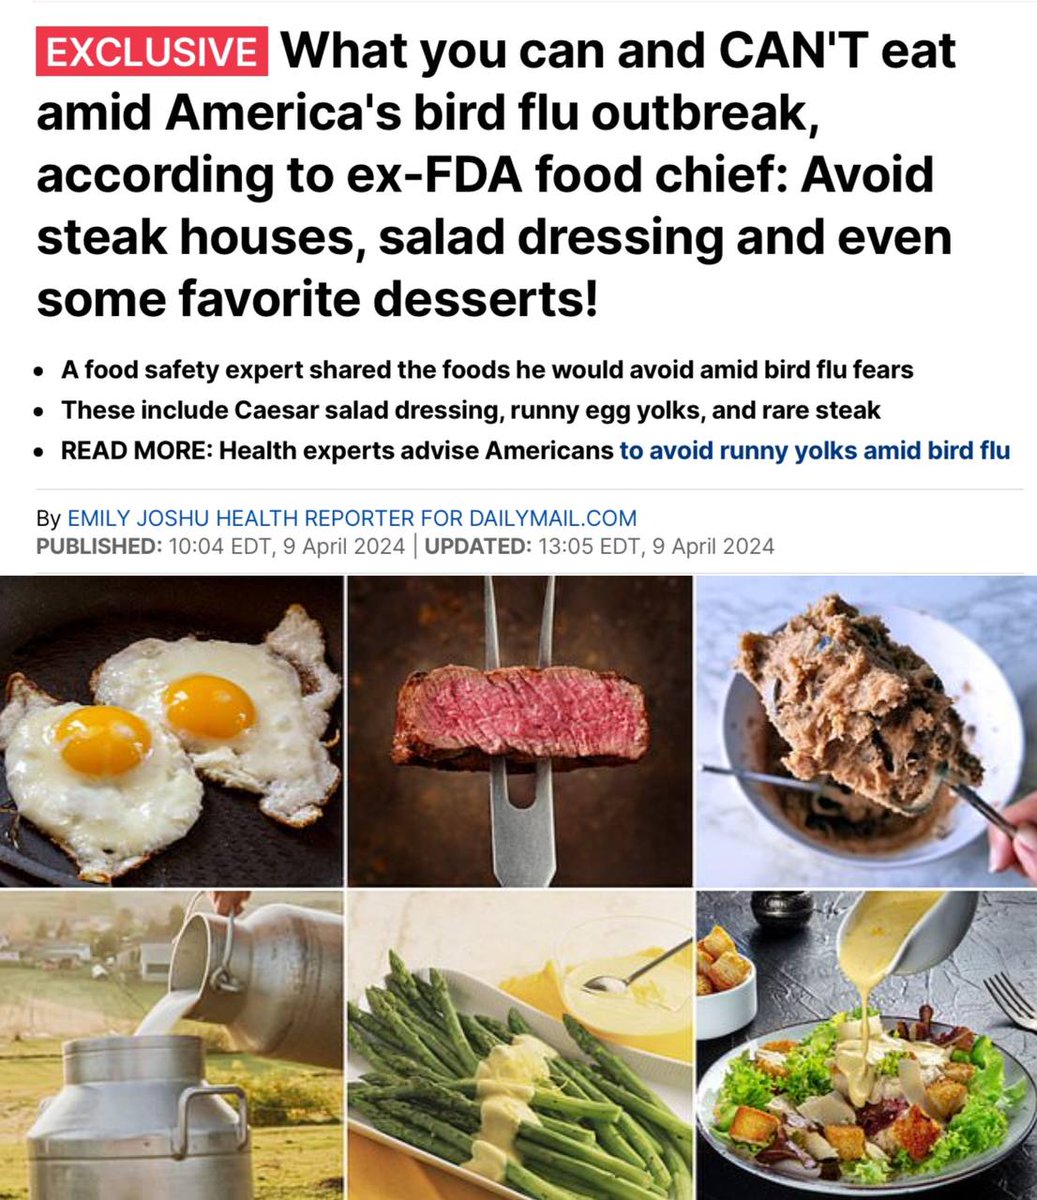 How to destroy the livestock segment of the economy without violating the constitution and/or laws on the books. It’s all part of the plan. “Americans are being urged to stay away from classic American dishes like steak and eggs and some desserts because there's a small risk of…